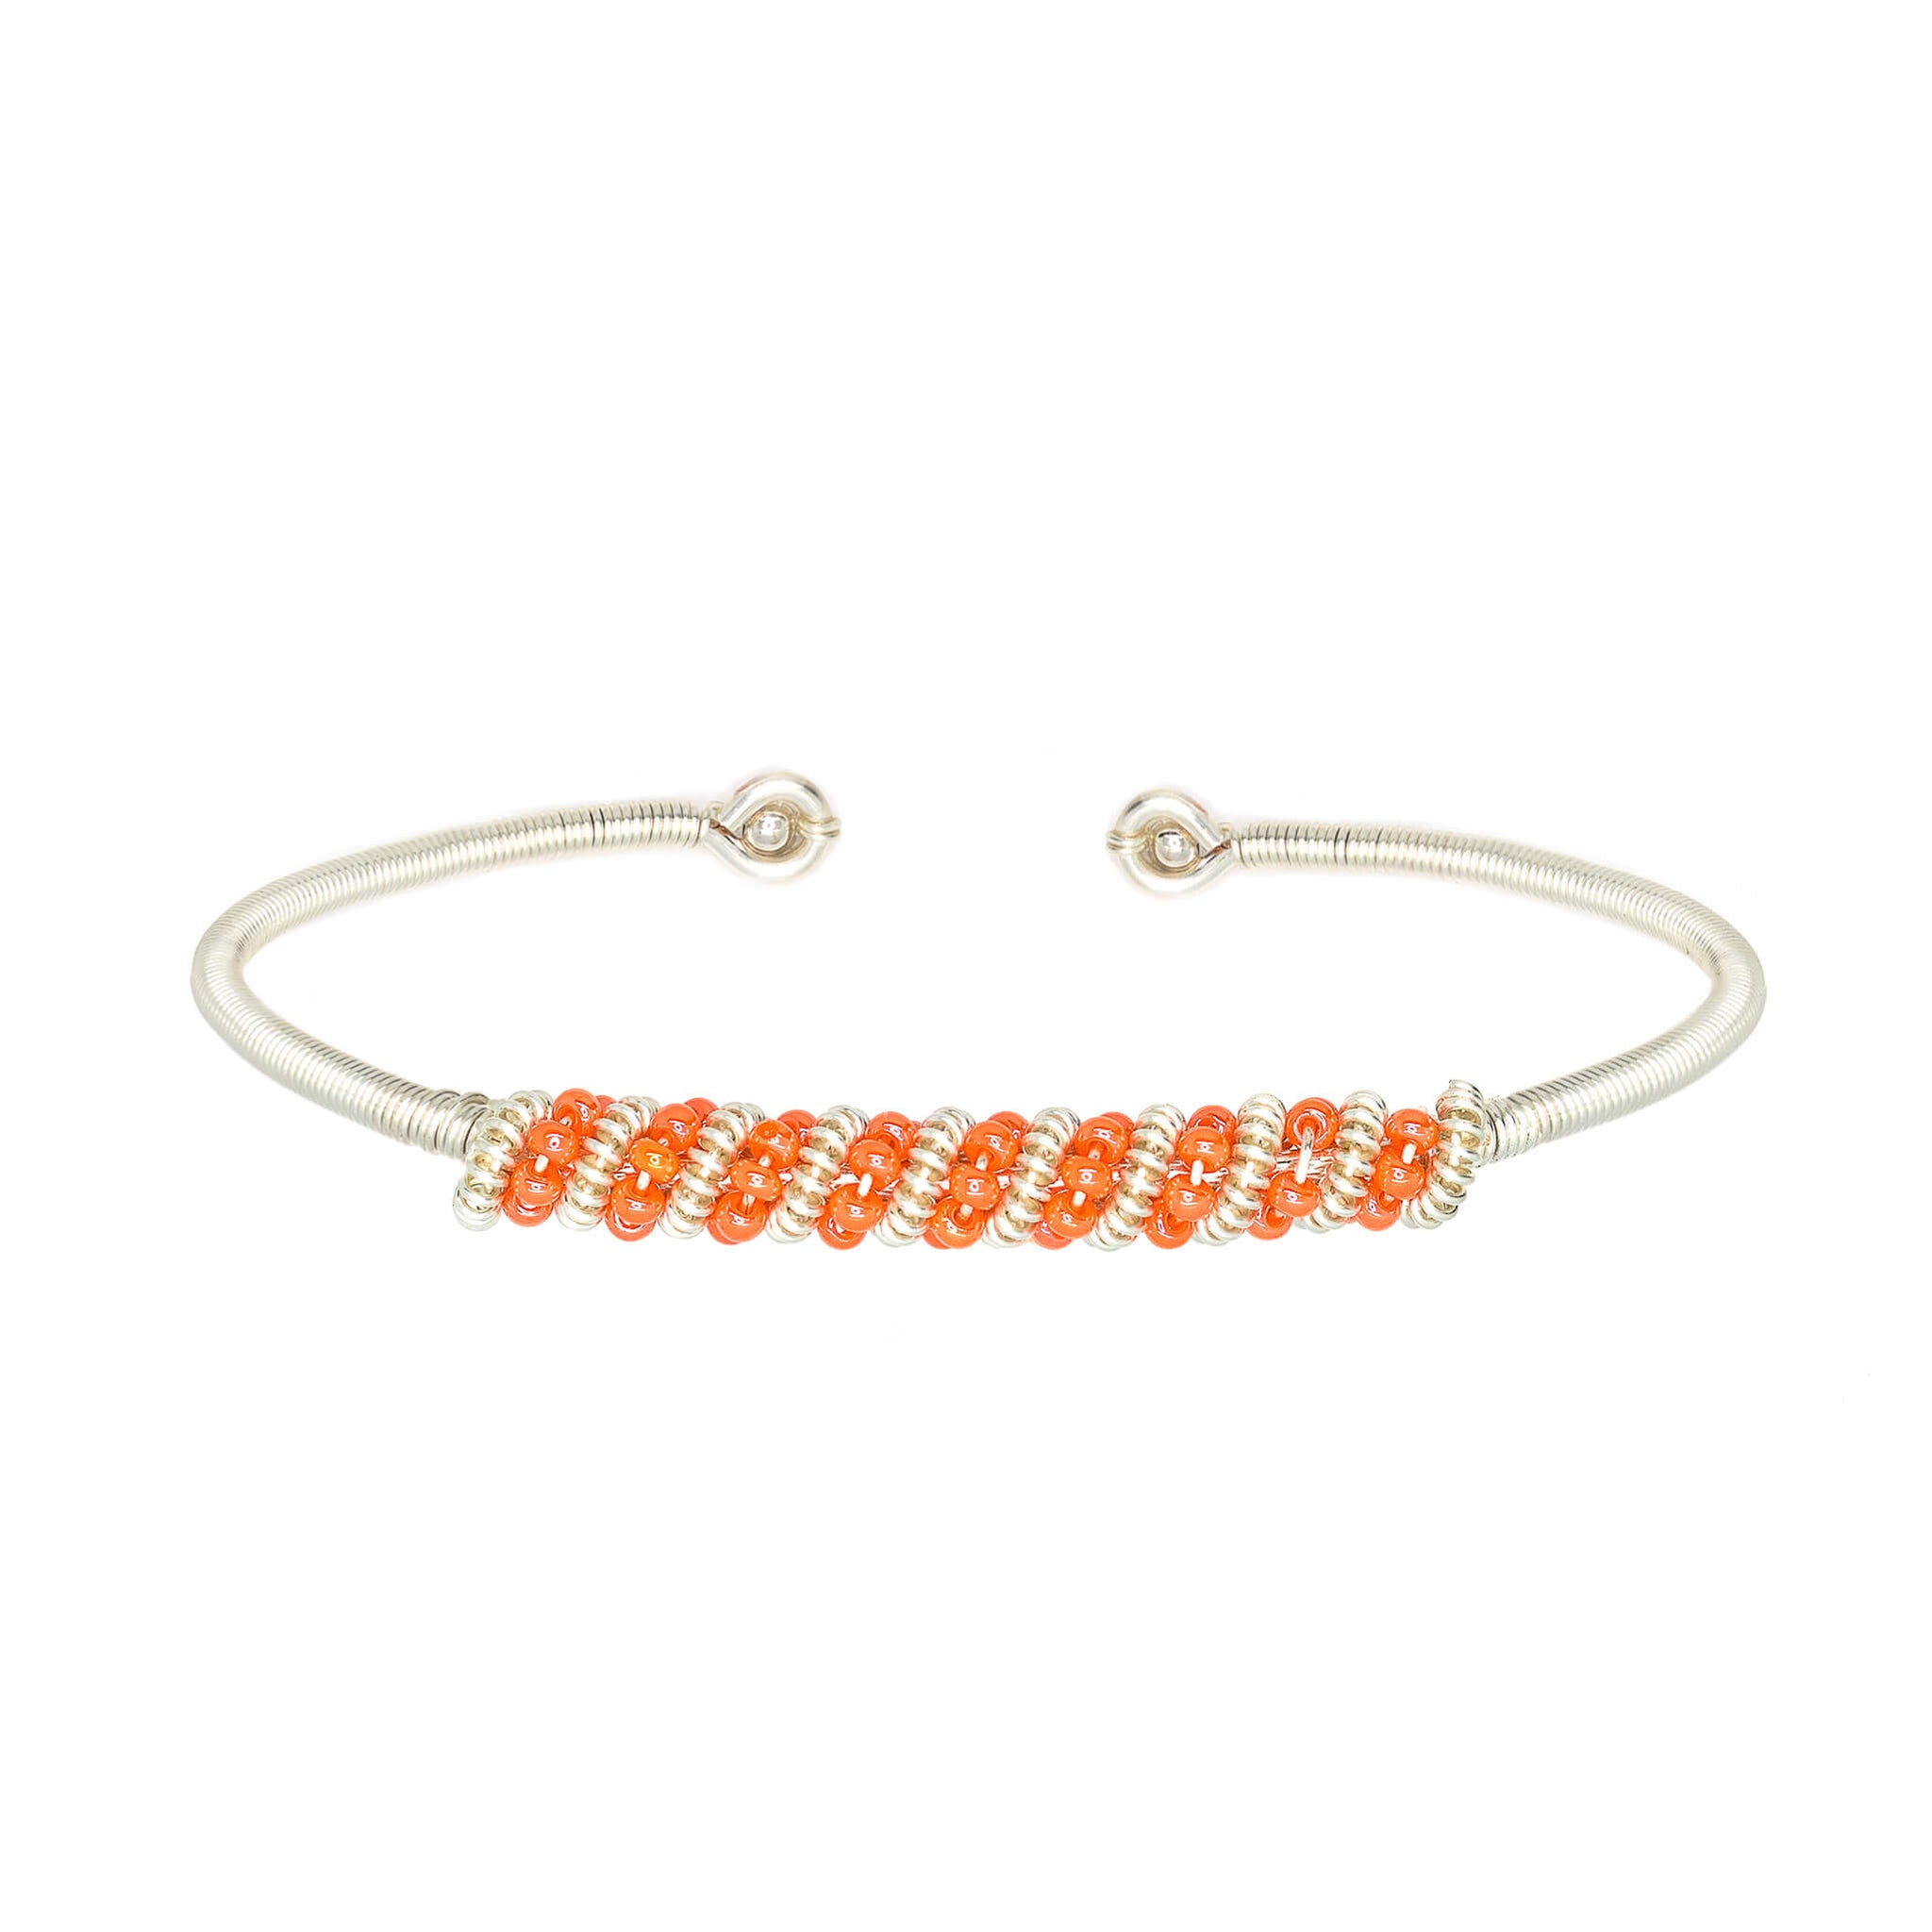 Siegen Bracelet is one size fits all. Silver and orange bracelet. Handmade with Non-tarnish silver wire and Czech seed beads crystals. Wire-wrapped beaded bracelet.